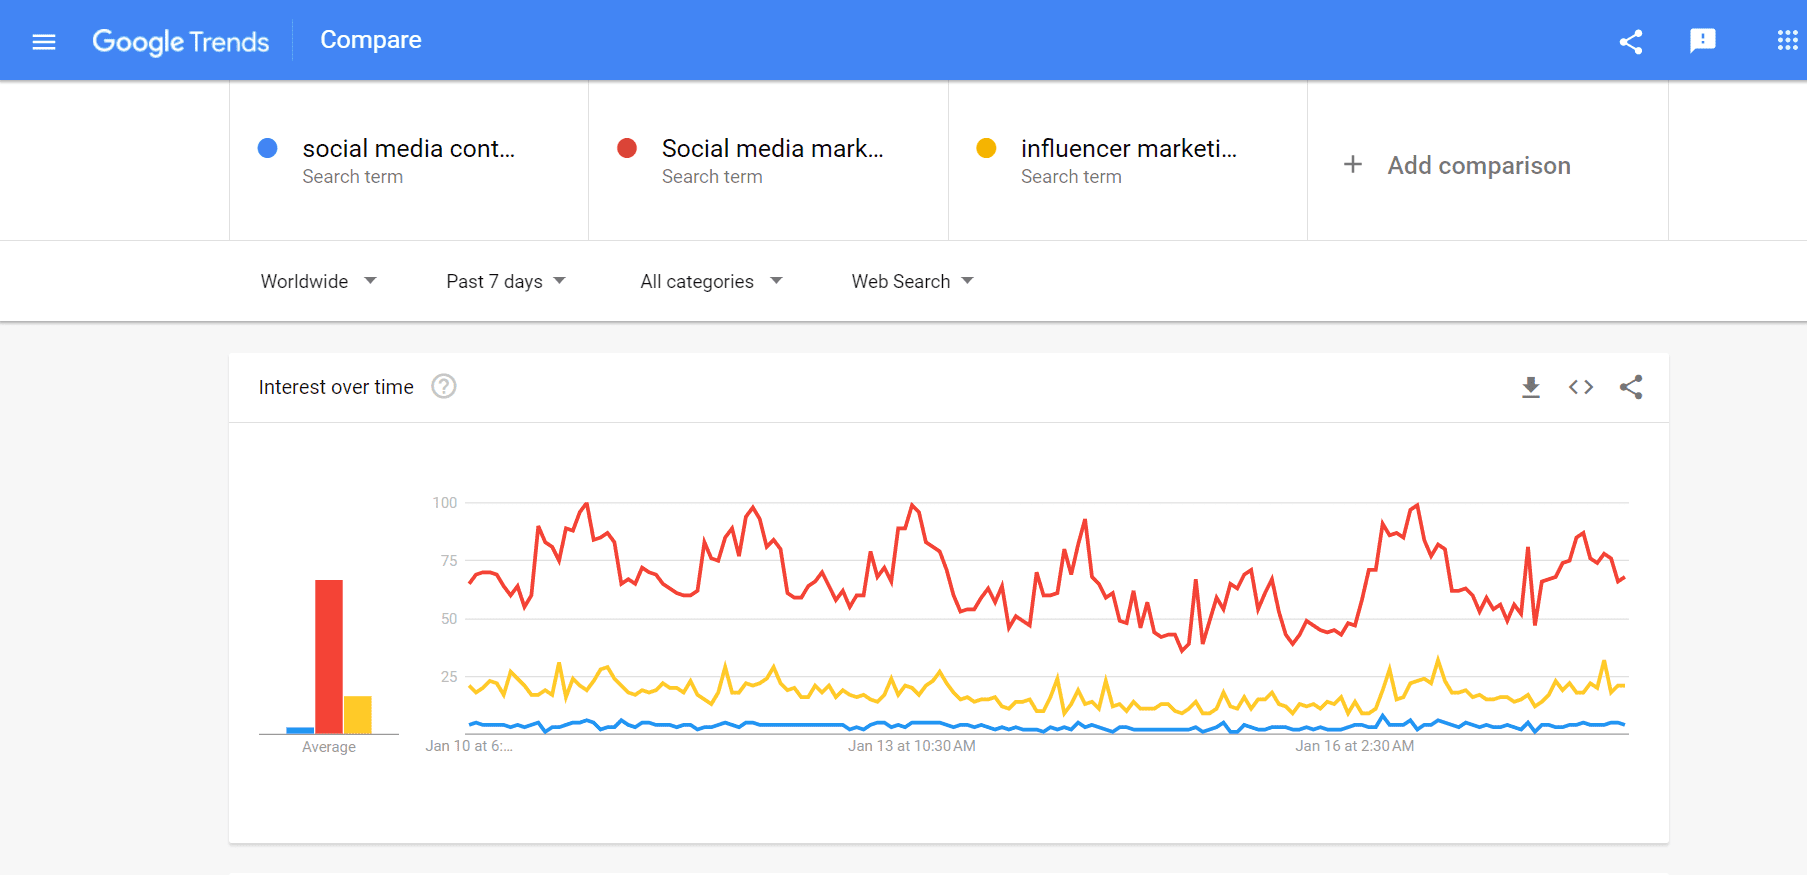 Google search trends comparison for three different search terms